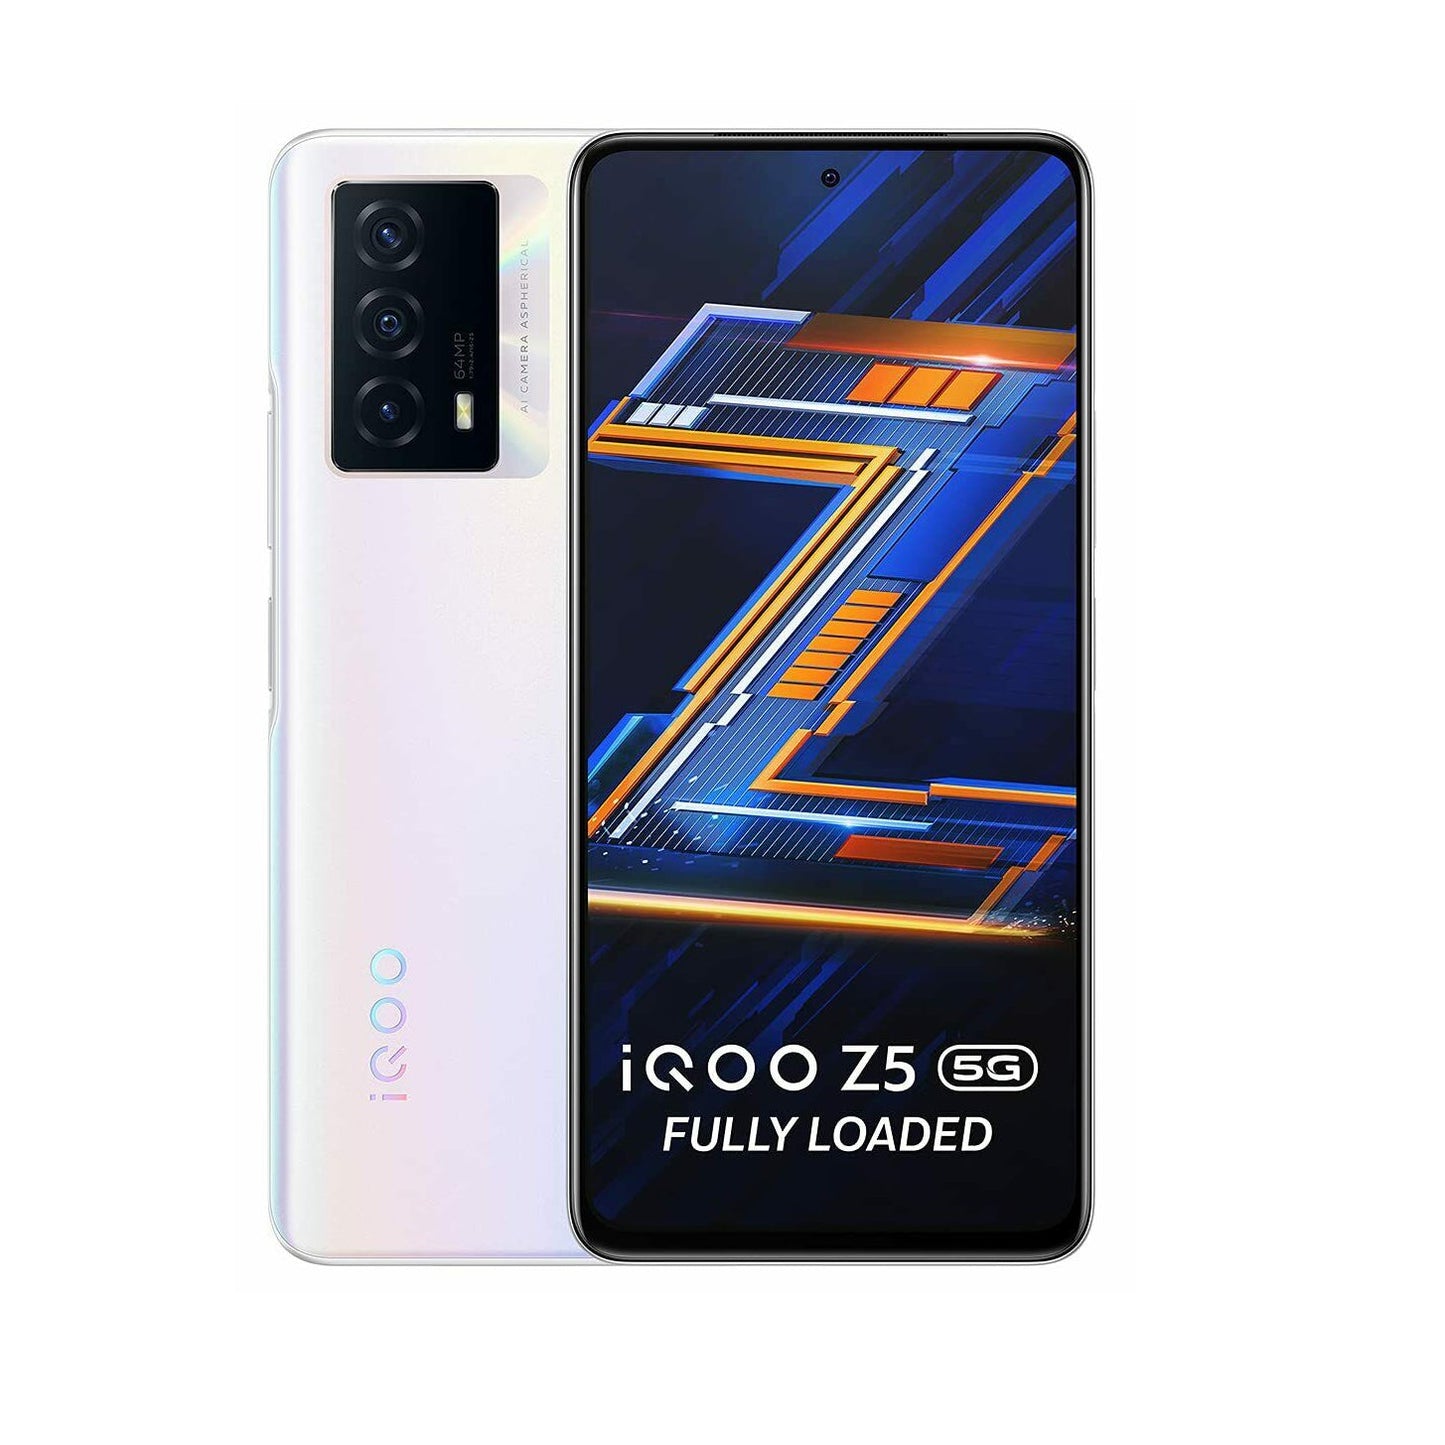 Vivo IQOO Z5 5G Phone with dual gsm unlocked smart phones Android Octa-core beauty camera 44W fast charging baby magazin 